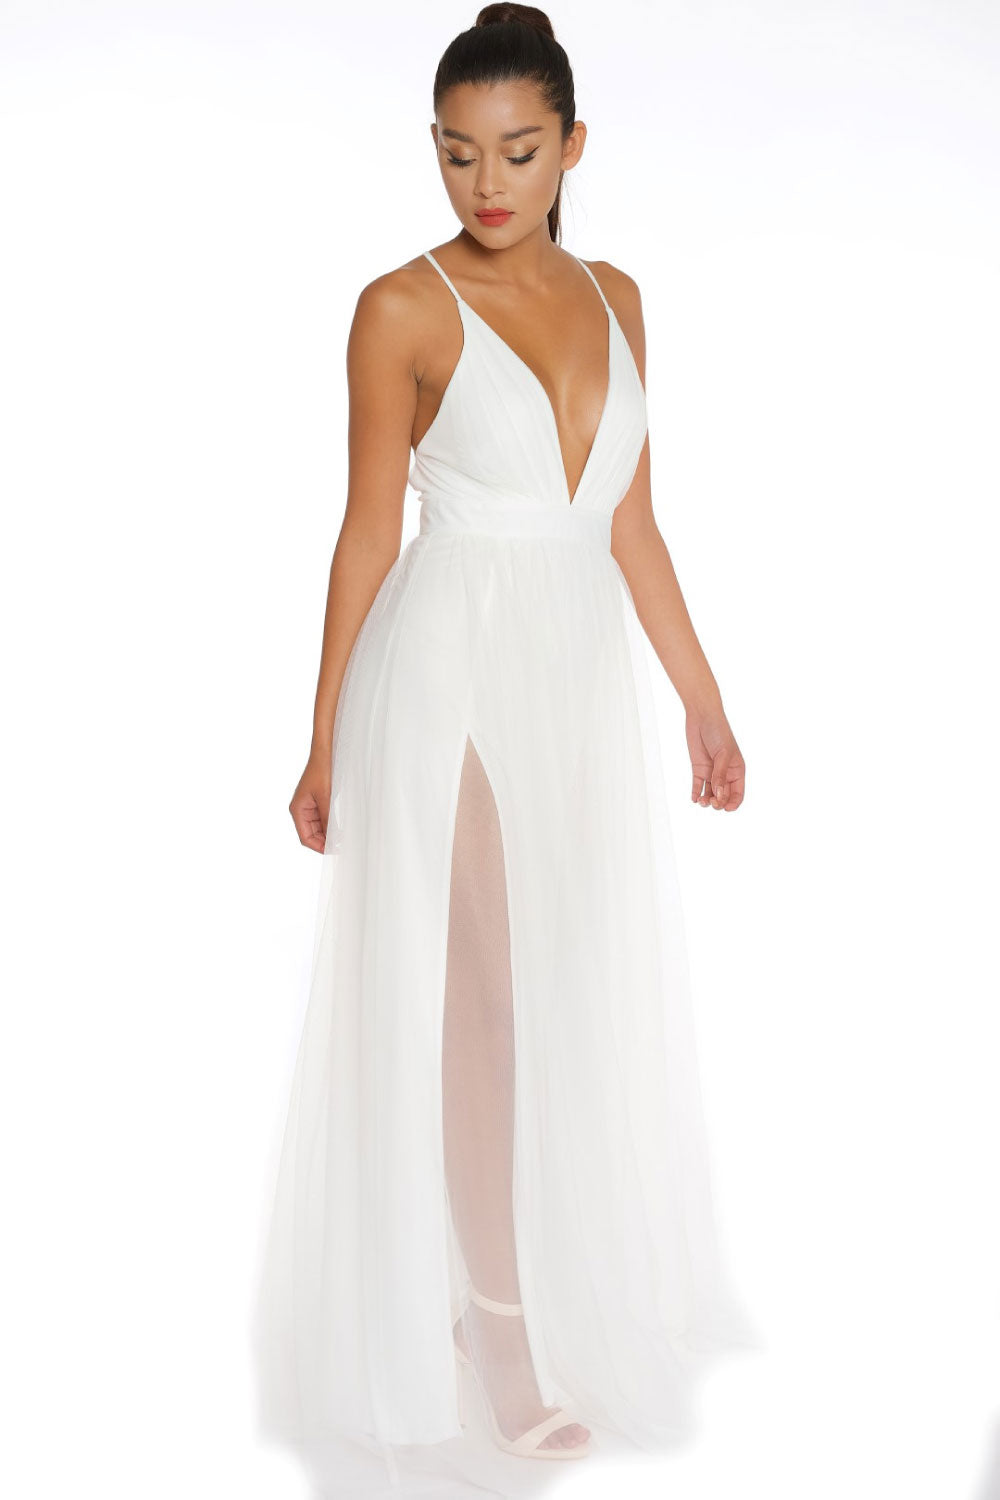 Image of the front of Luxxel's Elegant Deep V-Neck Maxi Dress in White on a model.